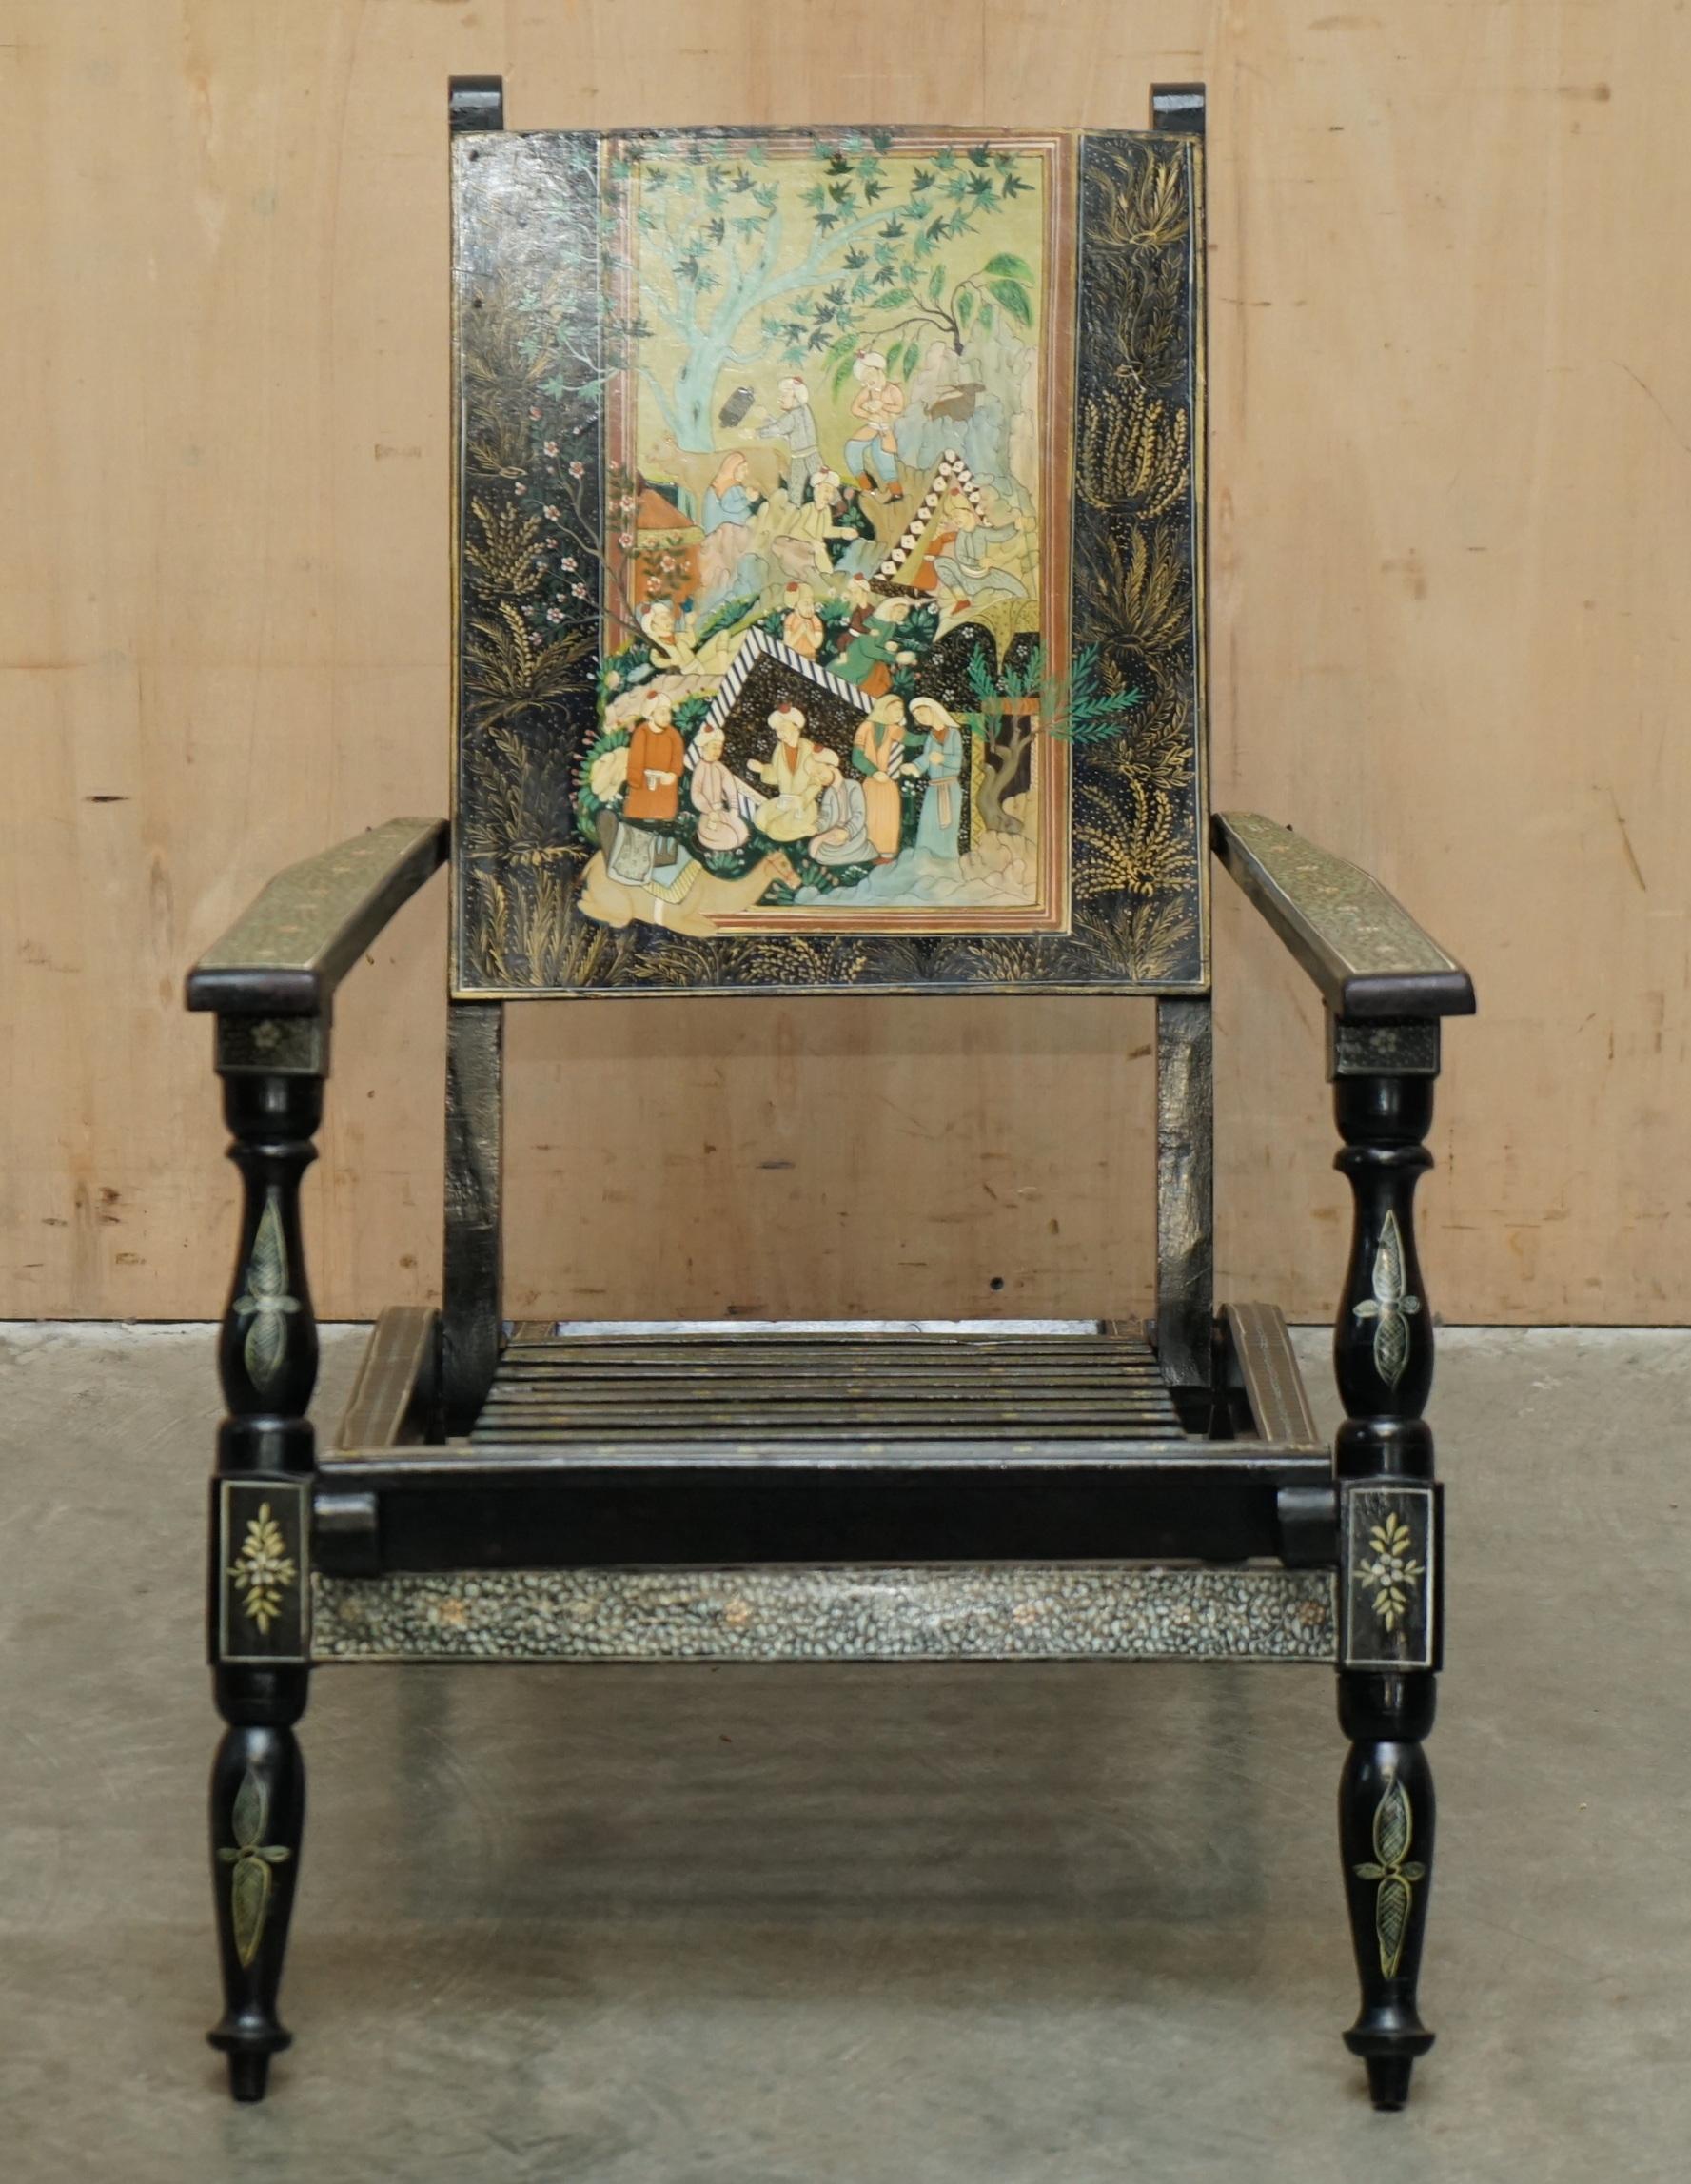 Royal House Antiques

Royal House Antiques is delighted to offer for sale this super decorative Anglo Indian hand painted folding armchair 

Please note the delivery fee listed is just a guide, it covers within the M25 only for the UK and local